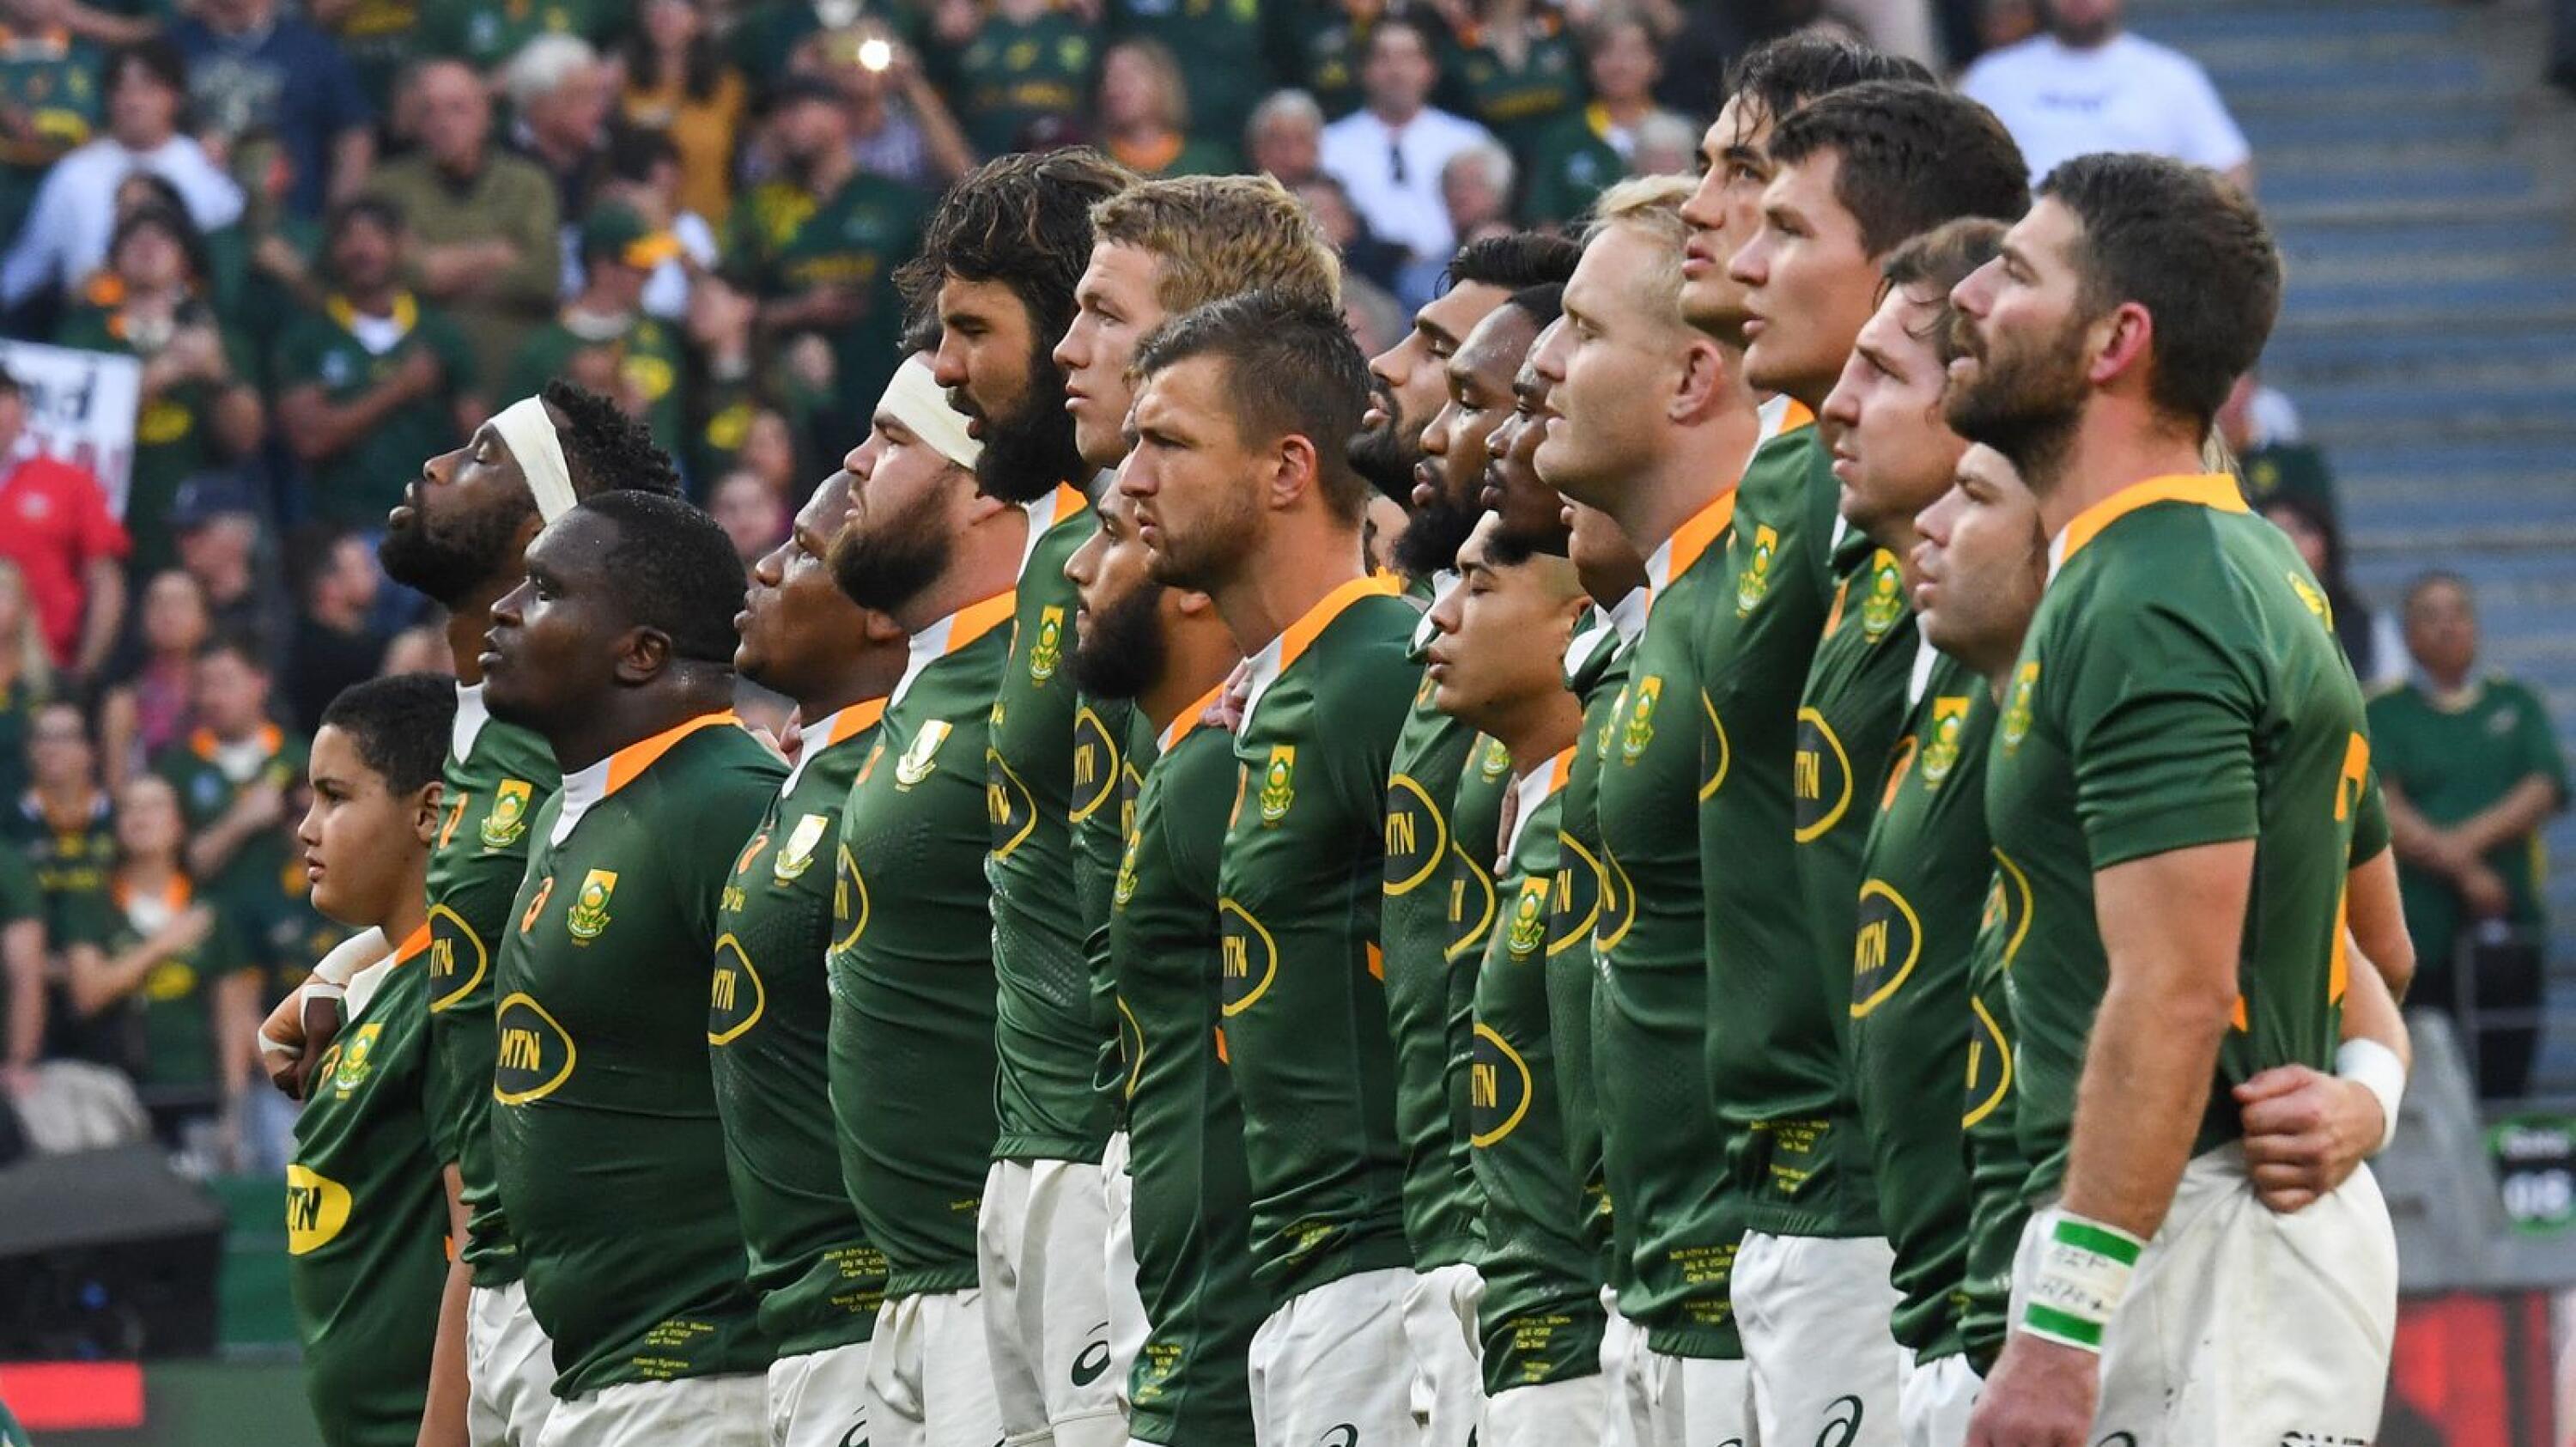 Springbok players sing the national anthem ahead of their Test match against Wales at Cape Town Stadium in Cape Town